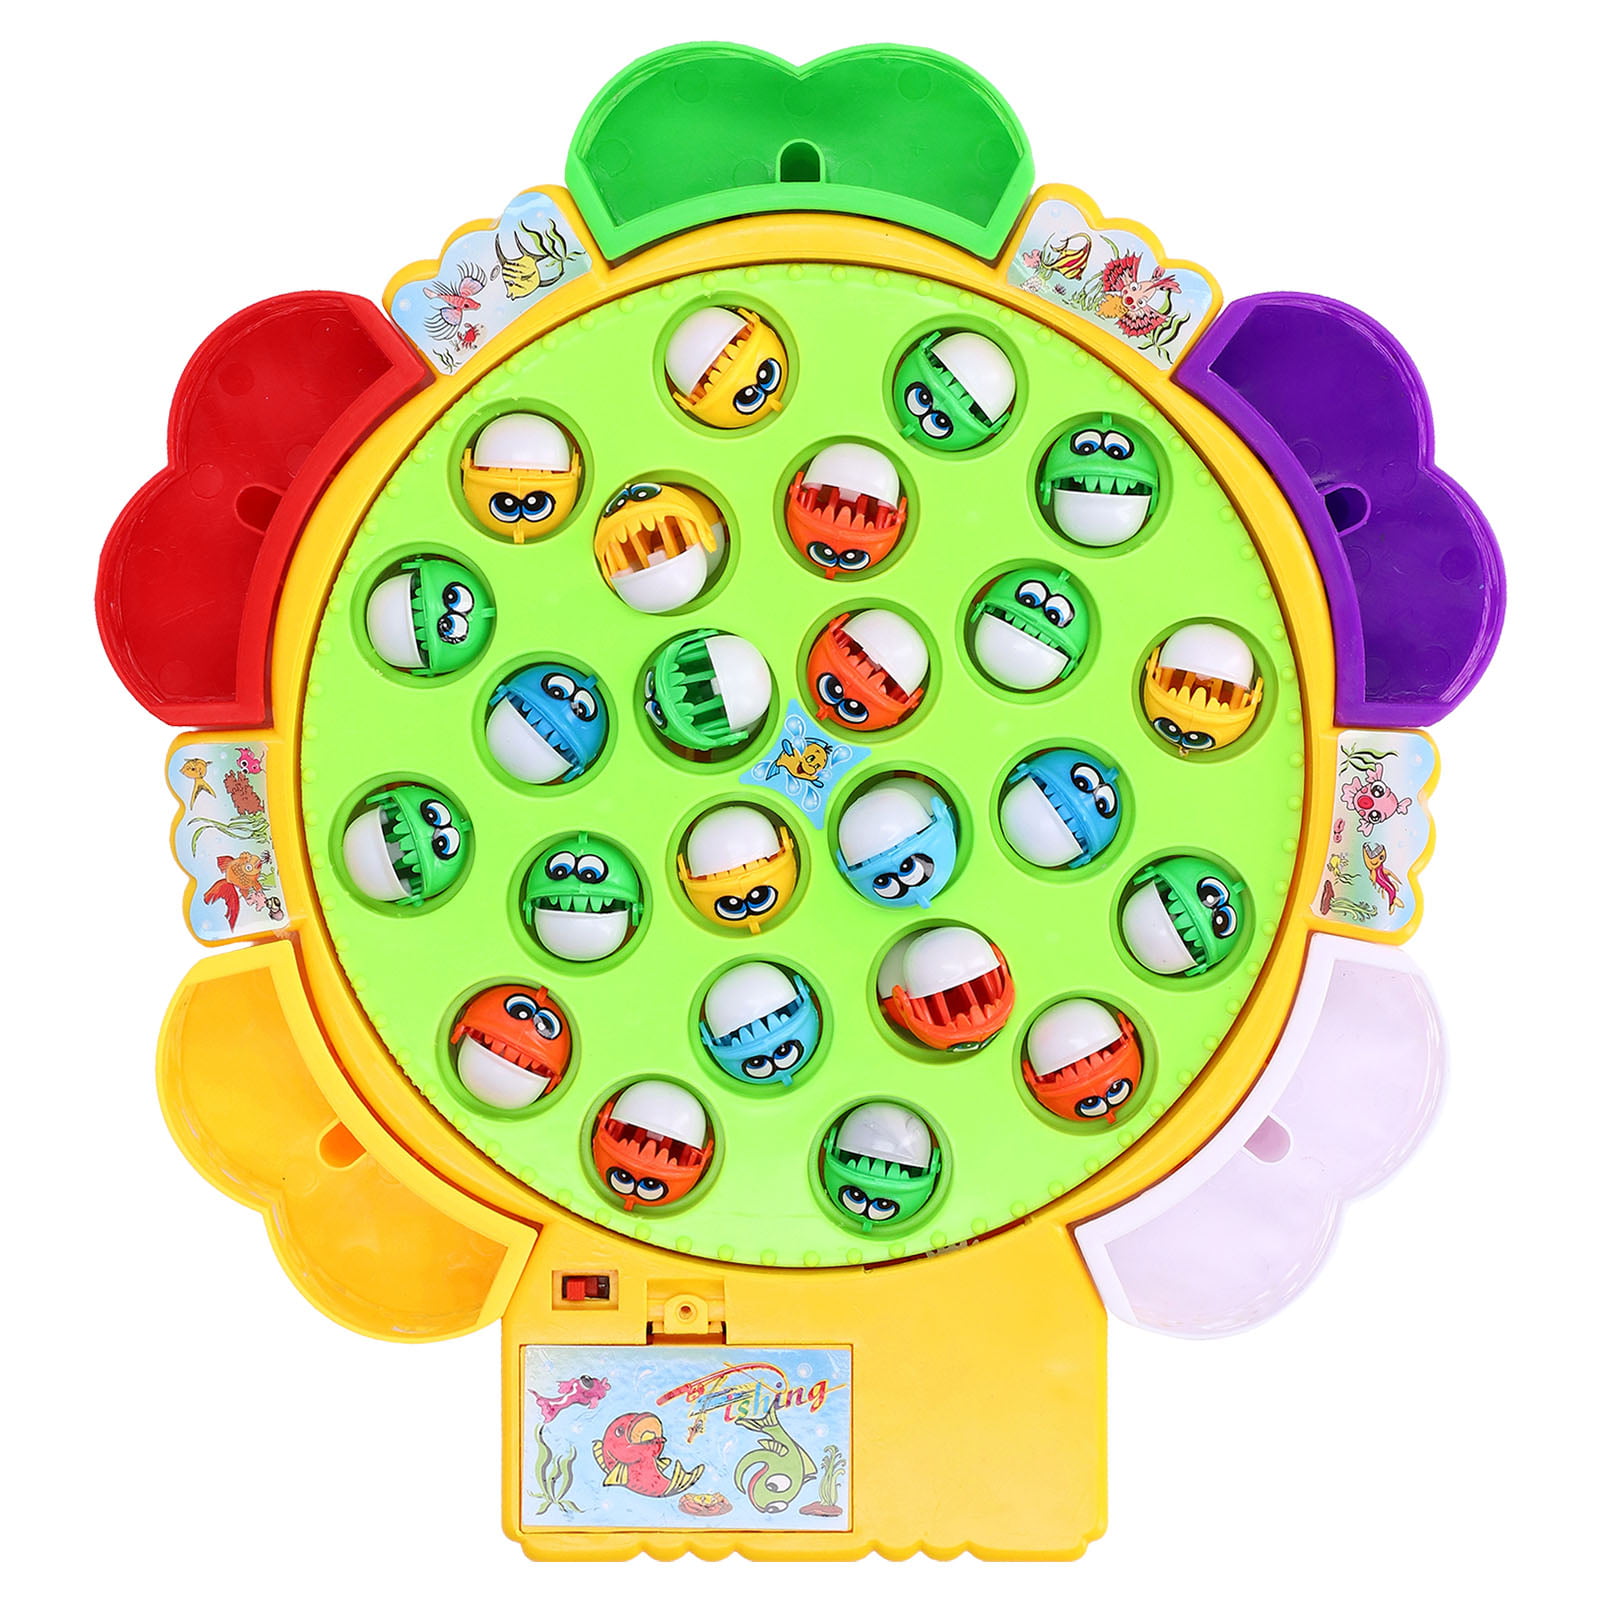 Ymiko Fishing Game Play Set 24 Fish 5 Poles Rotating Fishing Game Board  Gift For Kids Toddlers With Music,Fishing Toy Games,Colorful Fishing Toy  Games